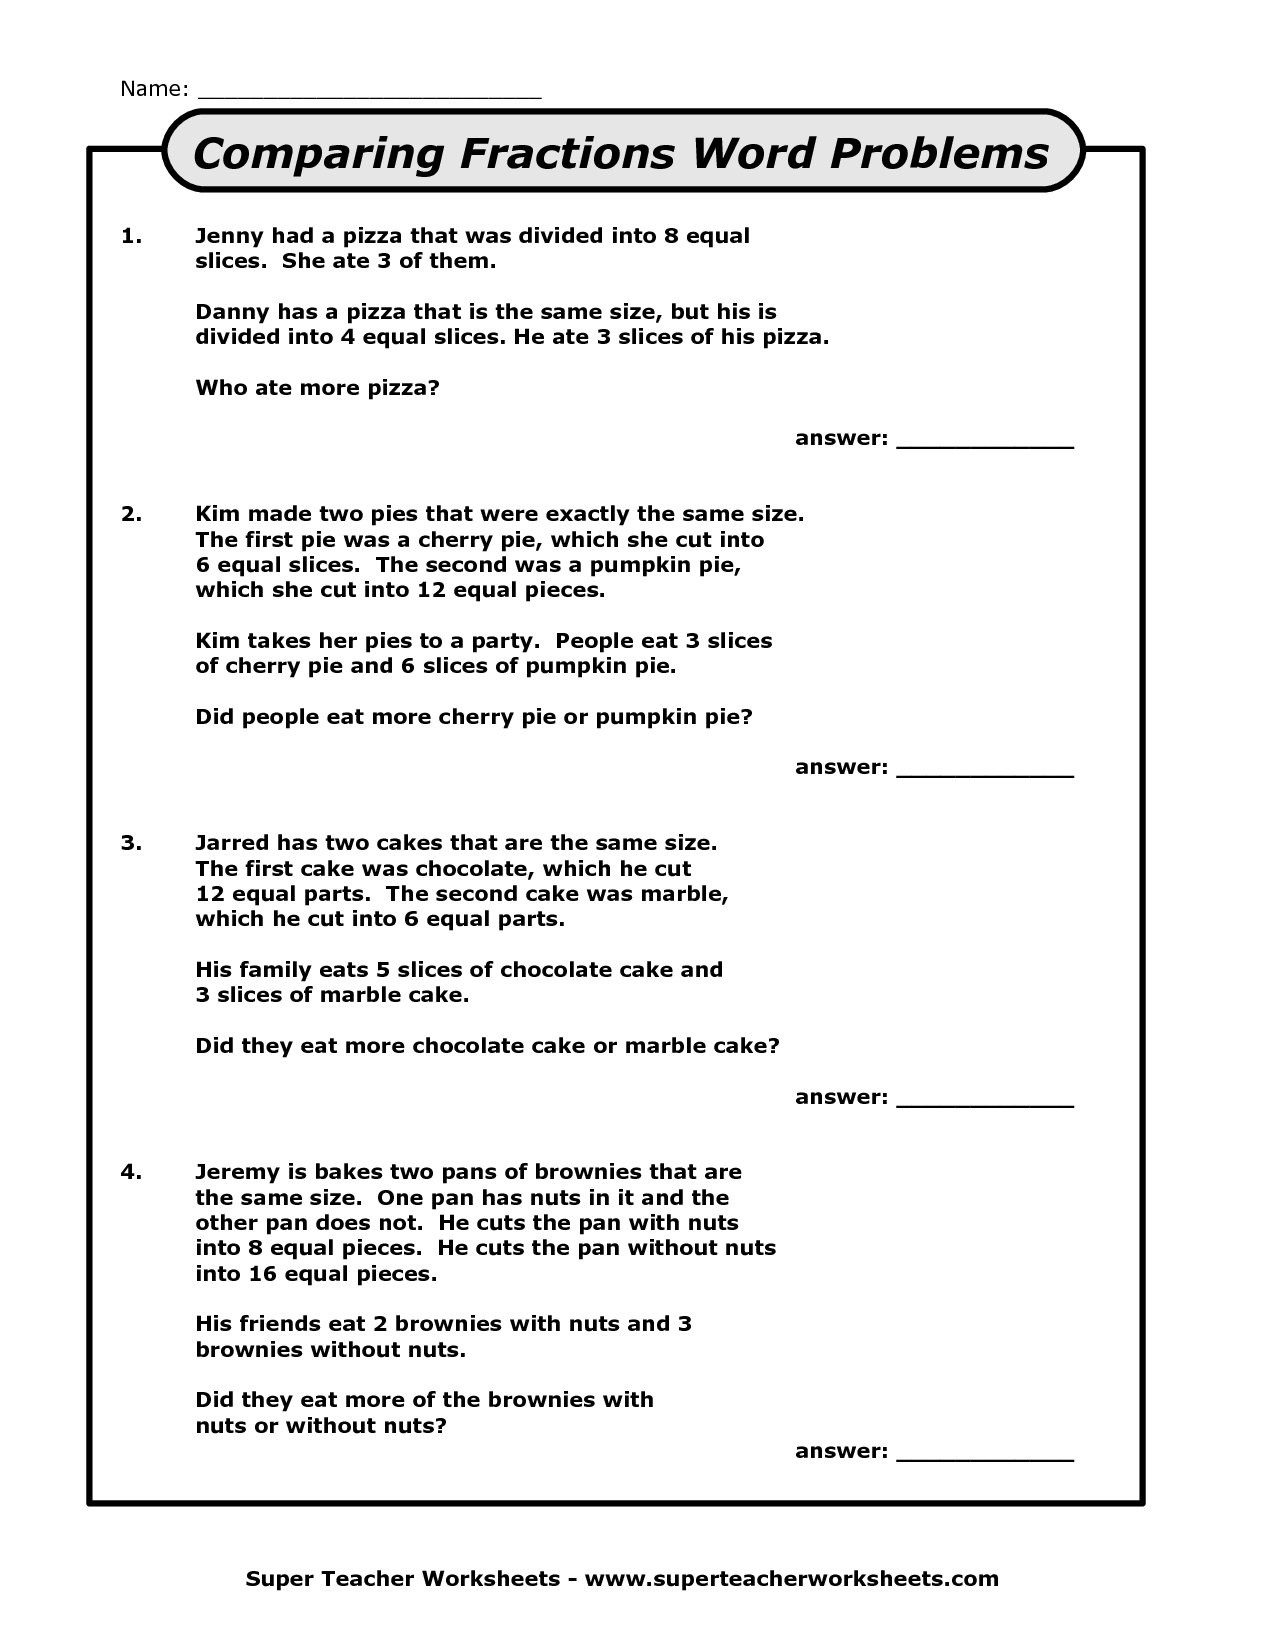 Fraction Word Problems Worksheets 7Th Grade The Best Worksheets Along With Fraction Word Problems 7Th Grade Worksheet